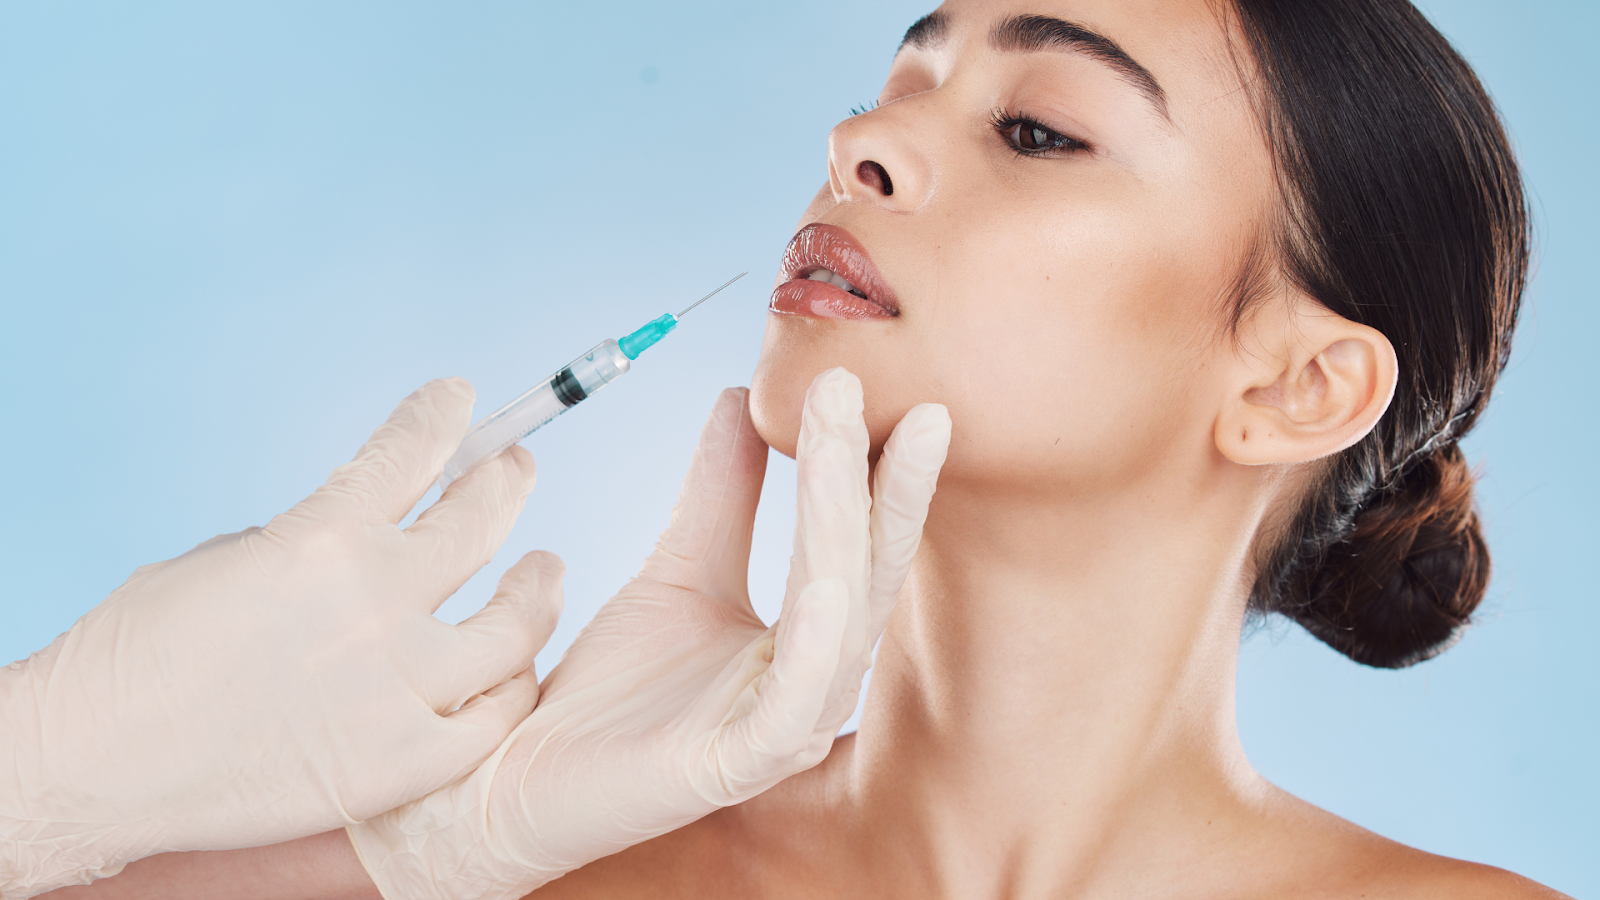 A female patient receives Restylane injections.